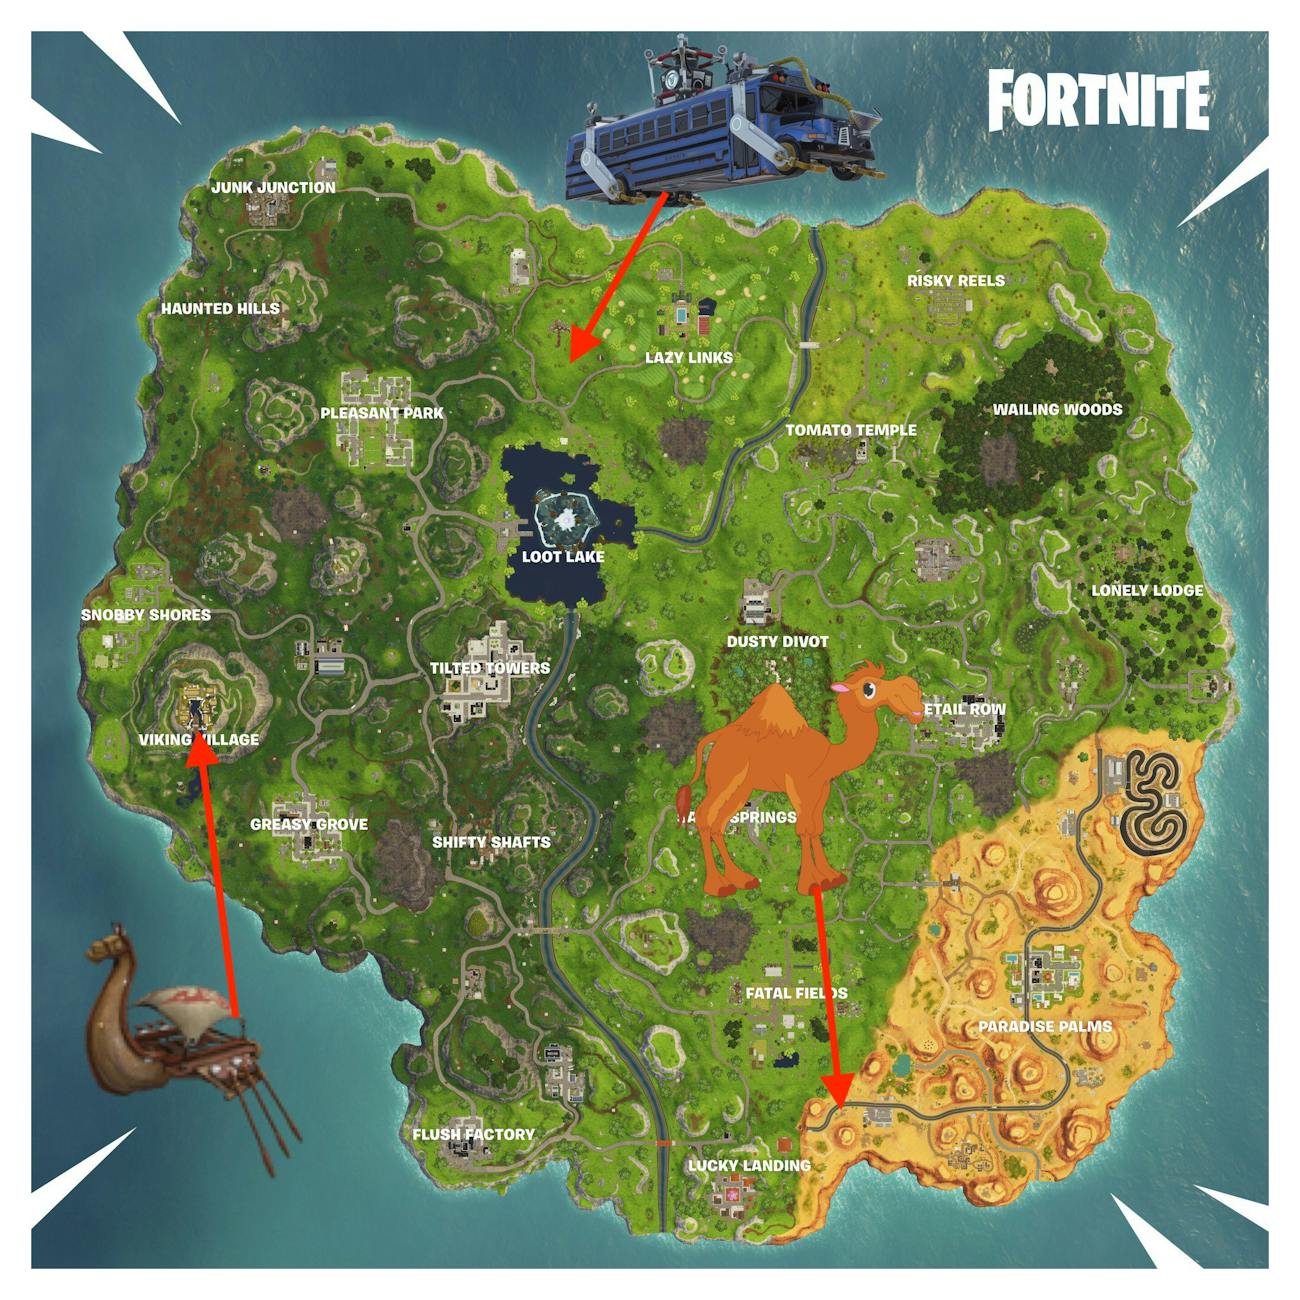 Fortnite Camel Crashed Battle Bus Locations Map And Video For - fortnite season 6 week 10 viking ship camel and crashed battle